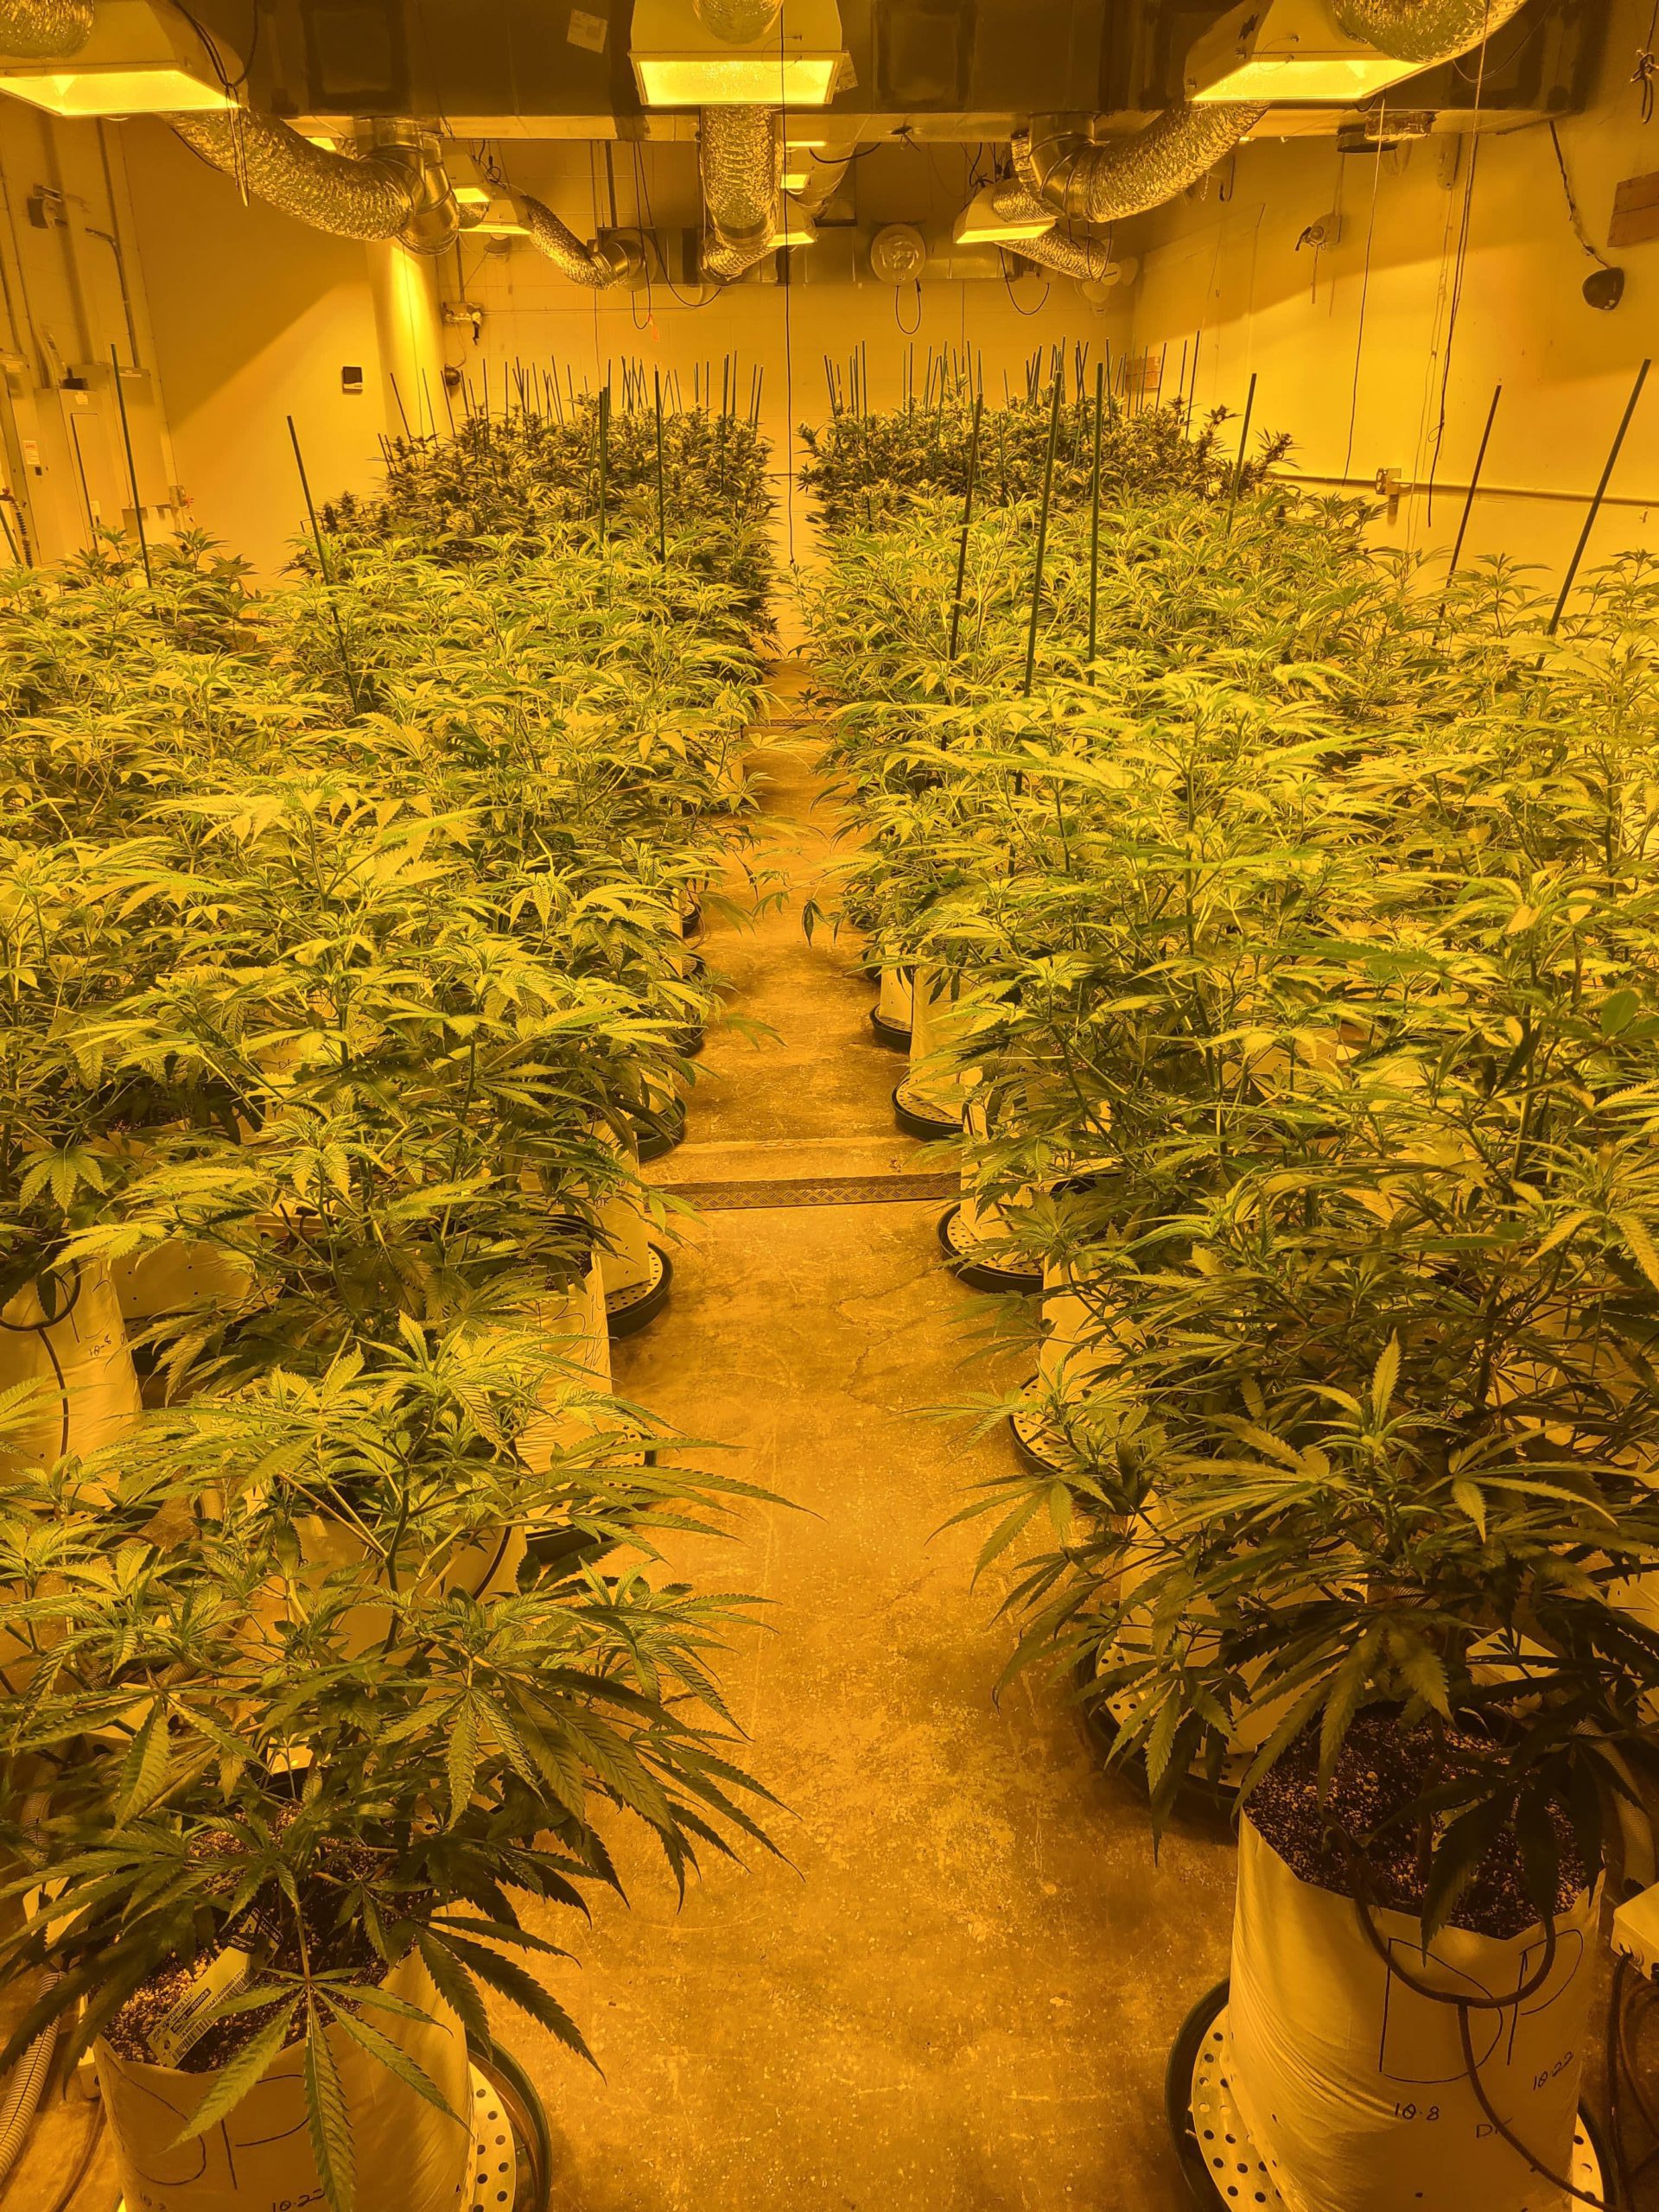 Absolutely, here are SEO-friendly details for the photo: Alt Text: “Cannabis Plants Under VPD Lighting in a Crop Steering Setup